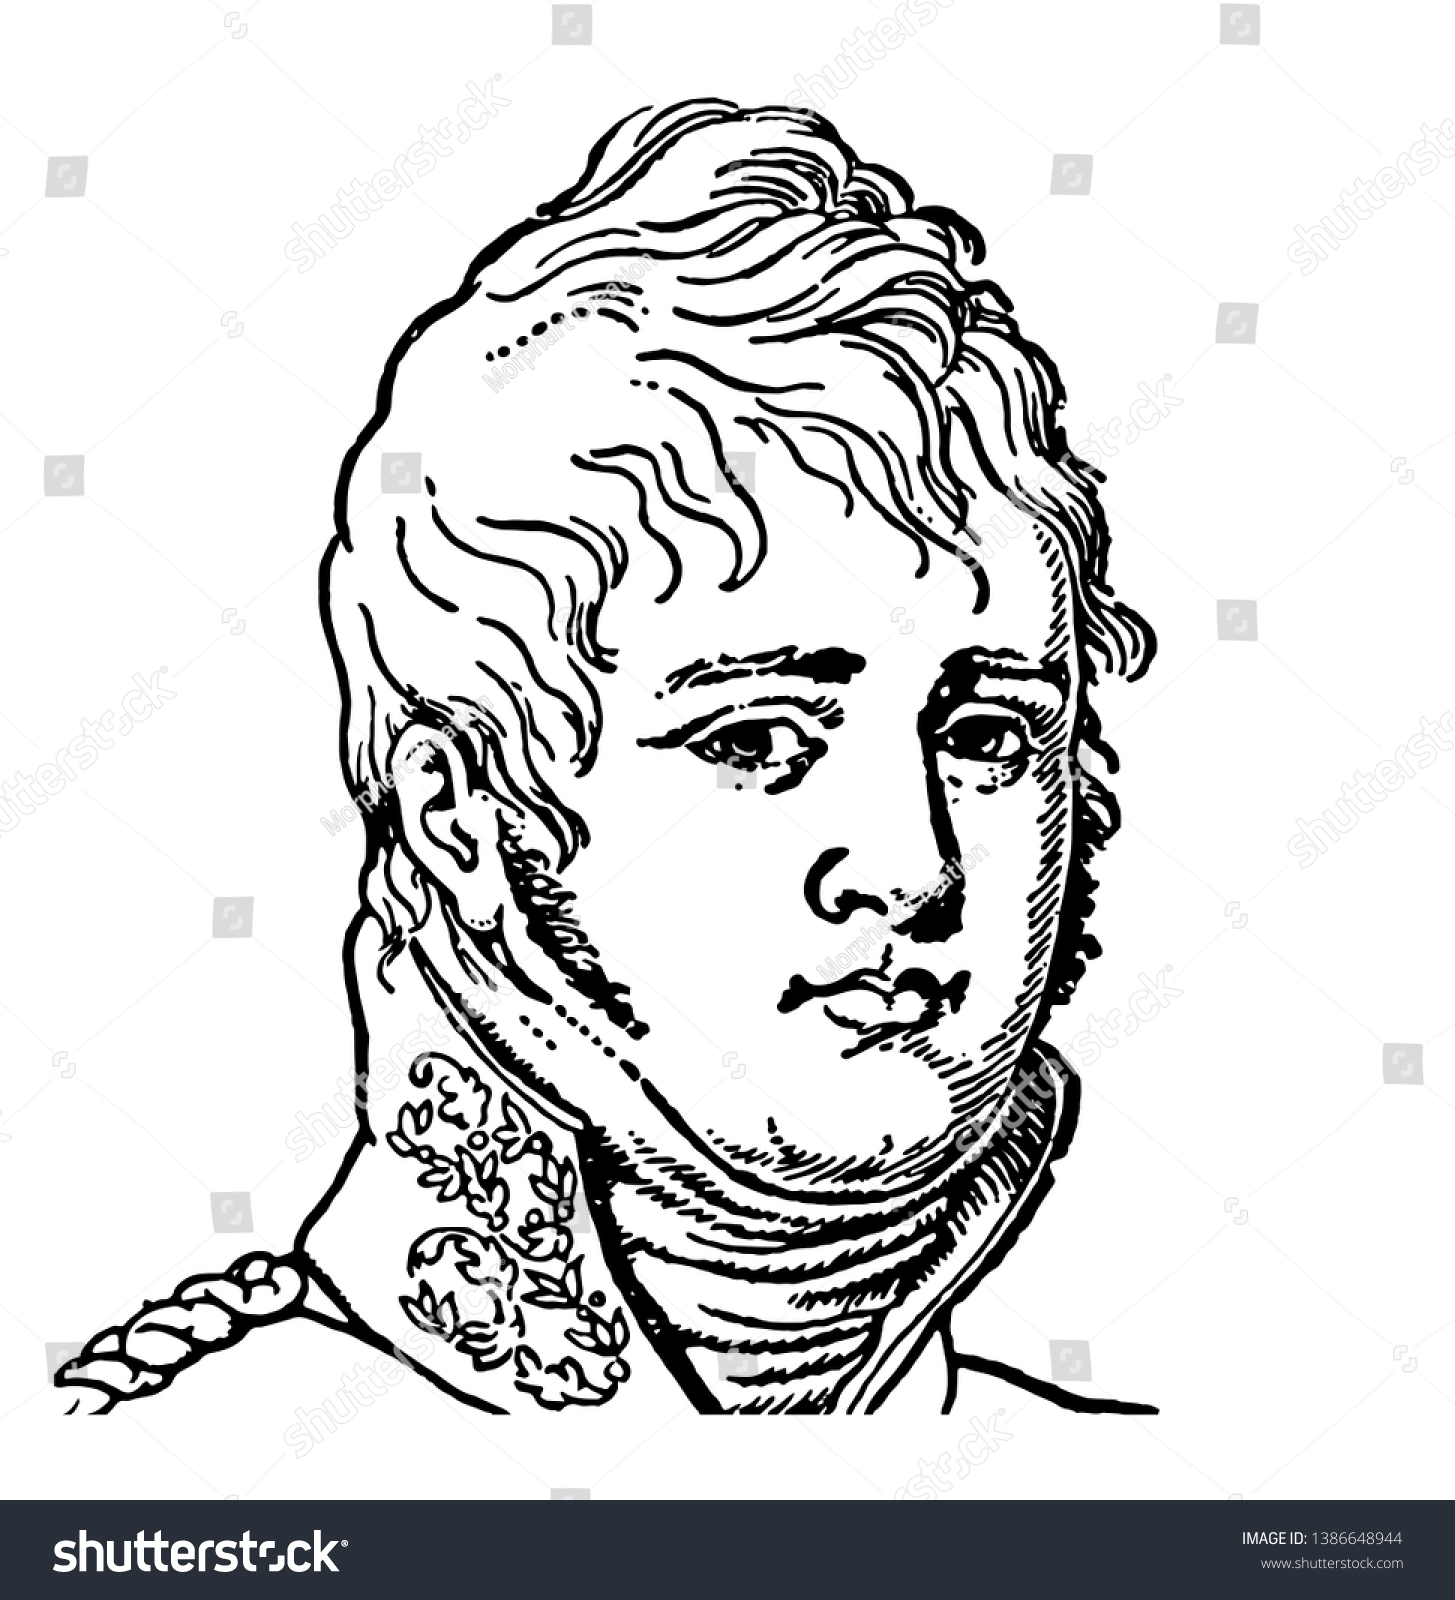 SVG of Tsar Alexander I, 1777-1825, he was emperor of Russia from 1801 to 1825, vintage line drawing or engraving illustration svg